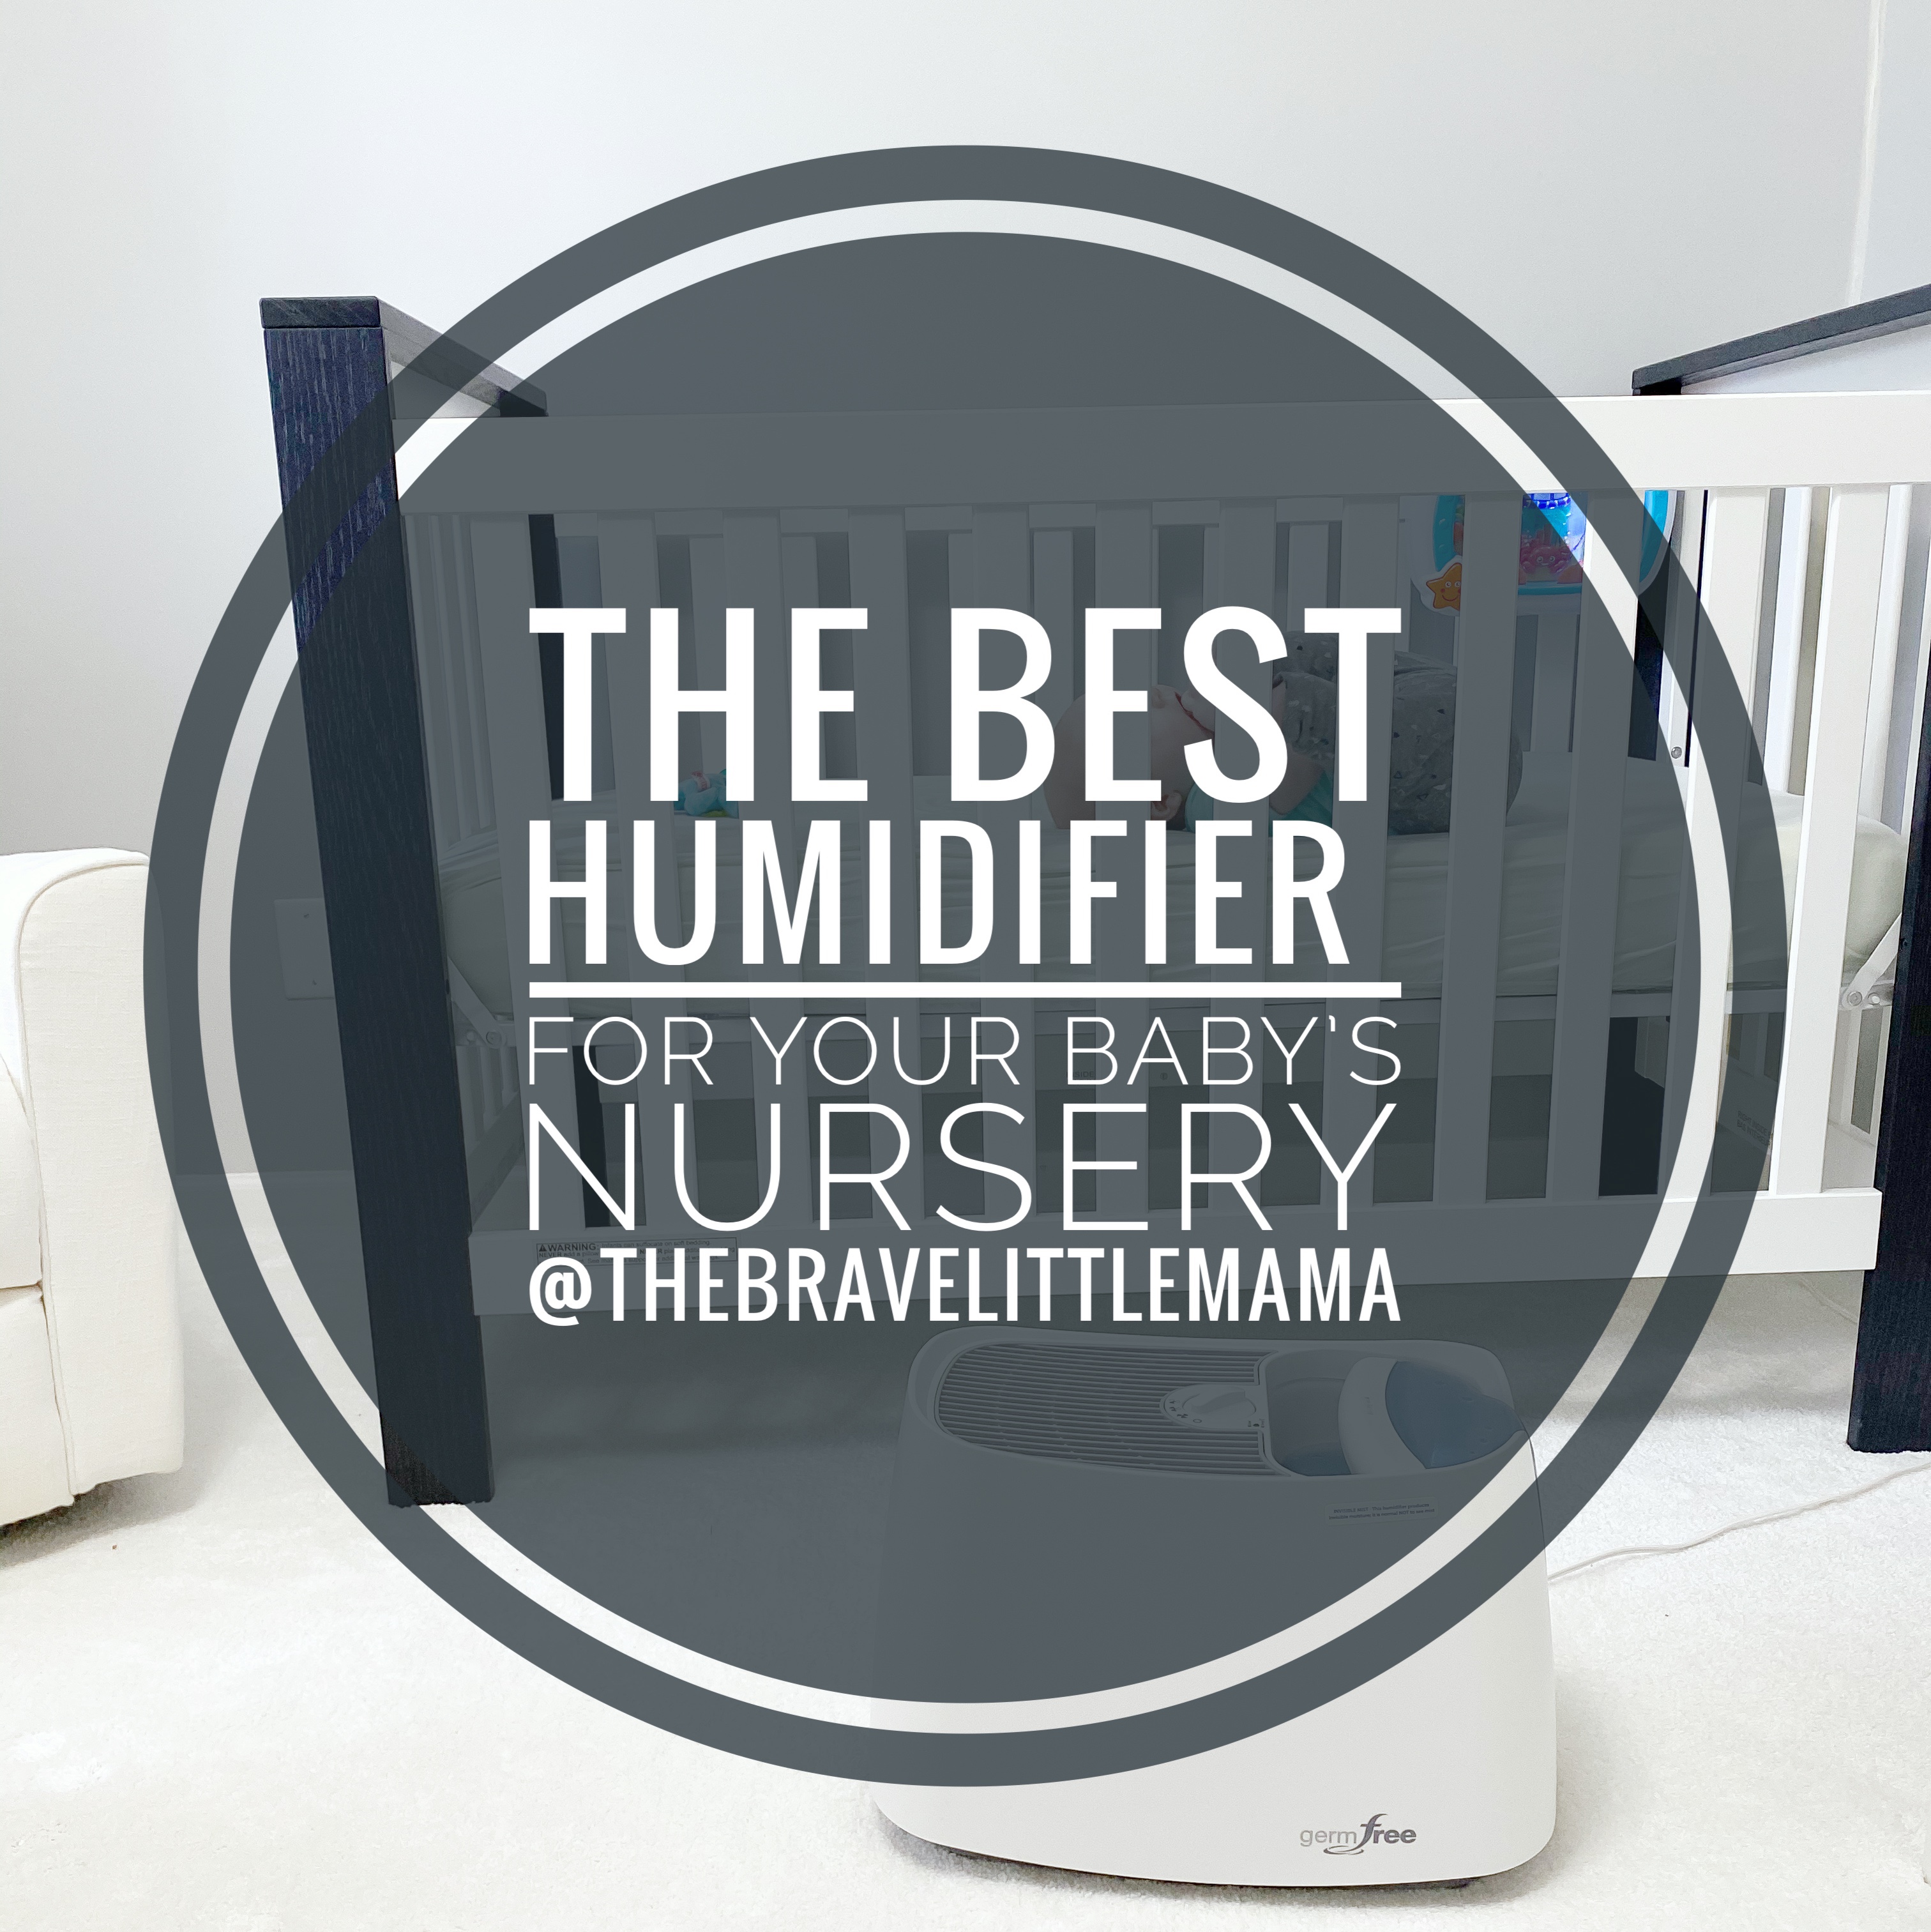 The Best Humidifier For Your Baby’s Nursery